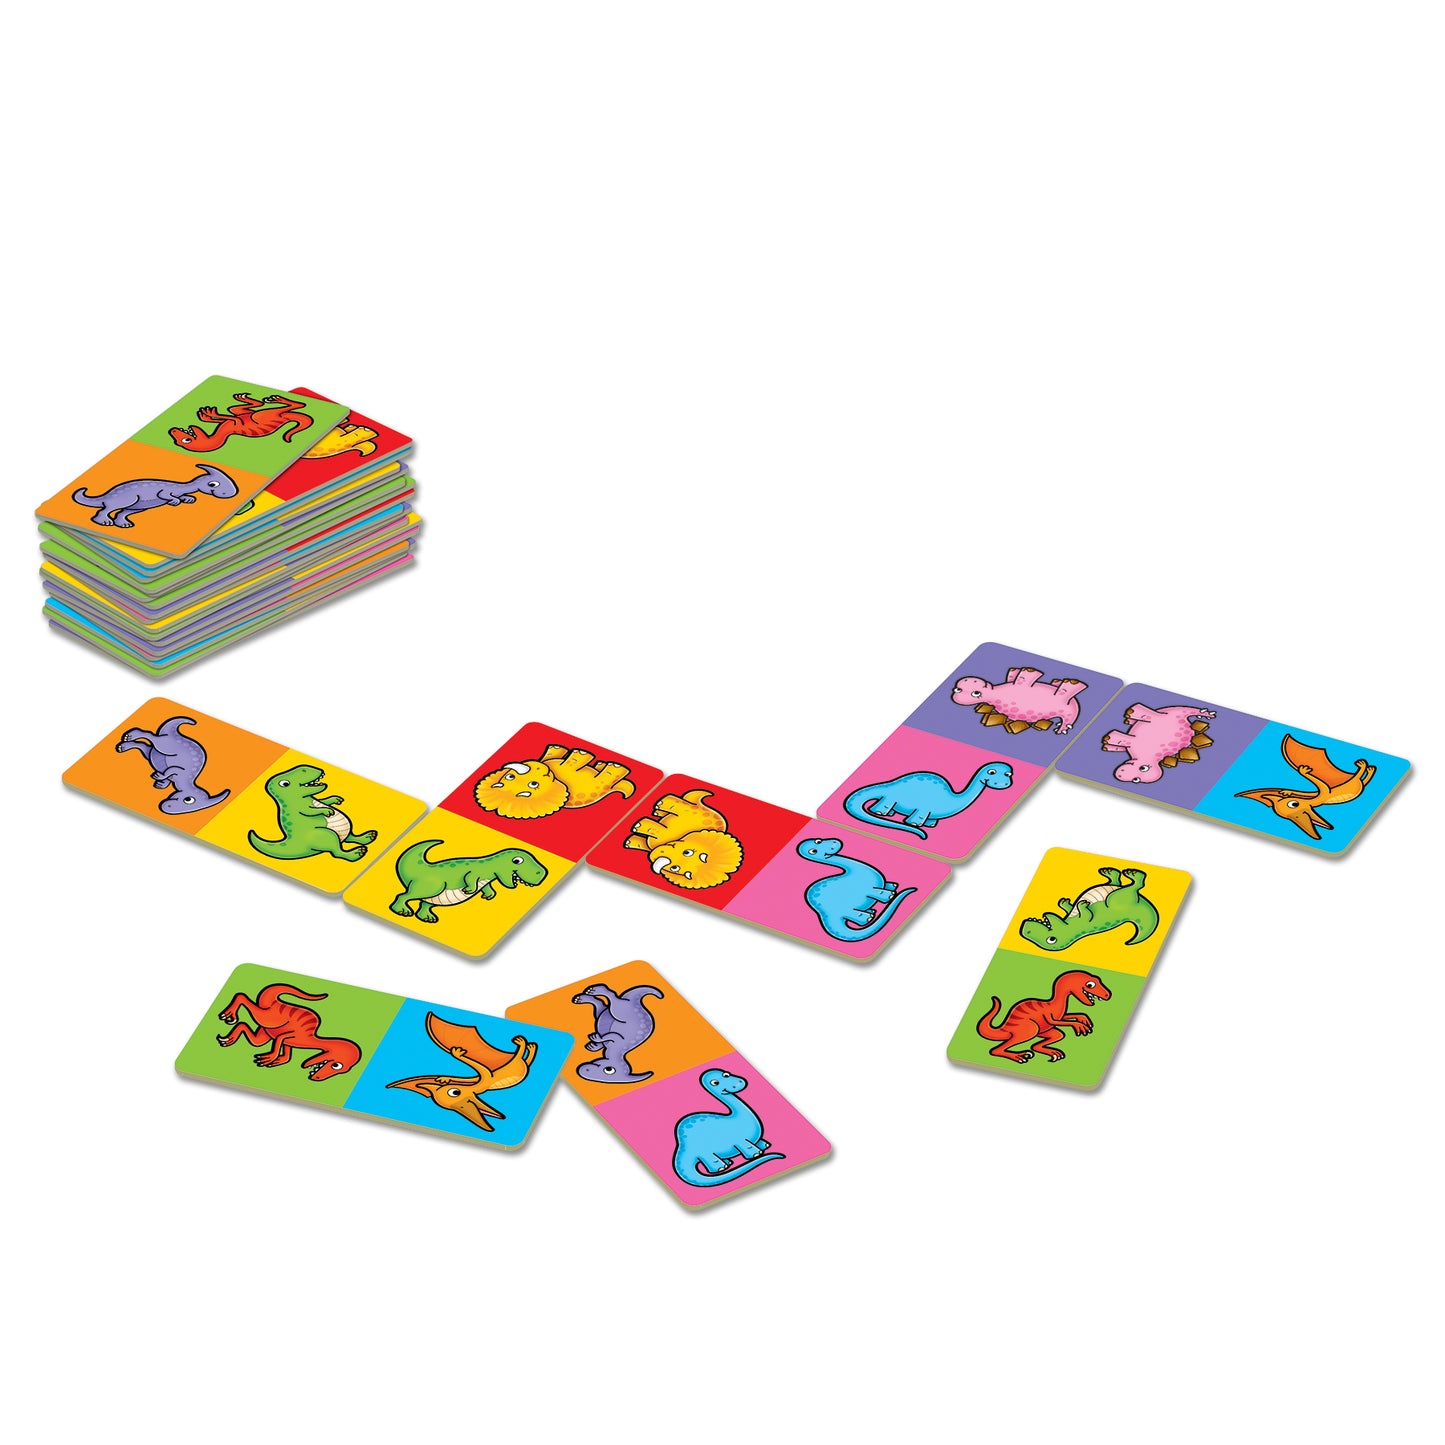 Orchard Toys Dinosaur Dominoes Mini Matching Game